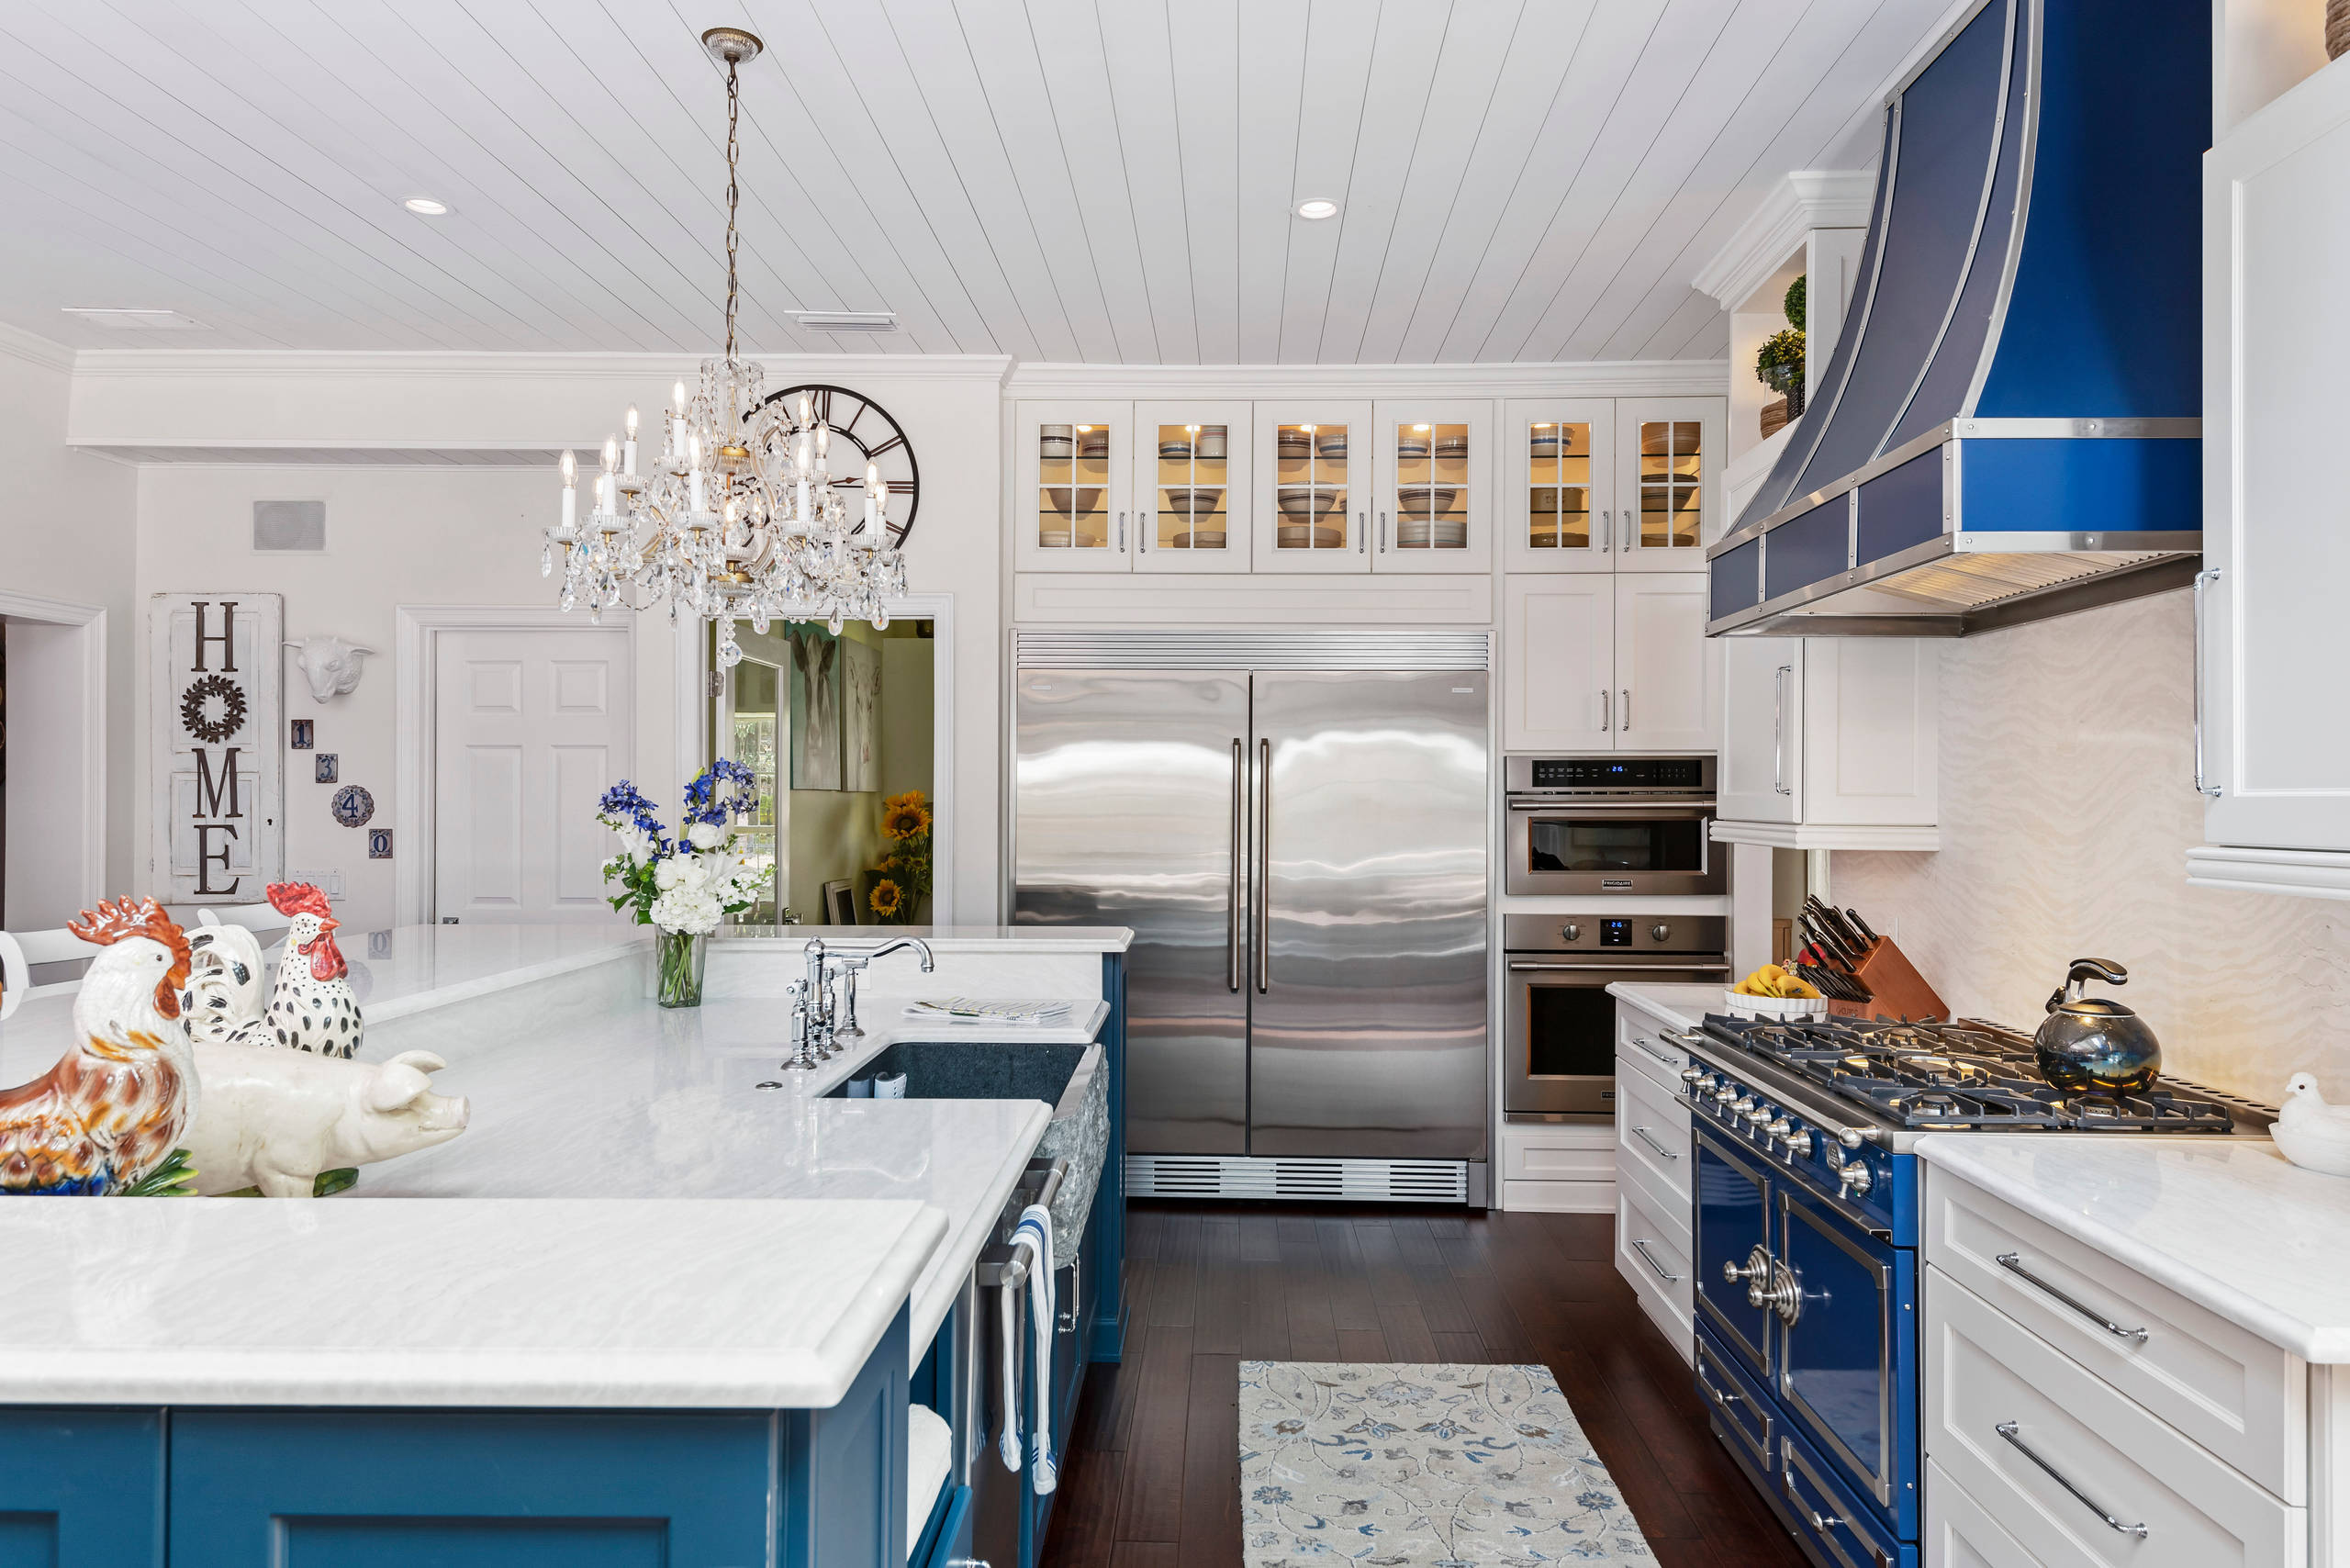 https://st.hzcdn.com/simgs/pictures/kitchens/blue-and-white-farmhouse-sandw-kitchens-img~ff116f7a0b72ea1d_14-8146-1-9c24627.jpg